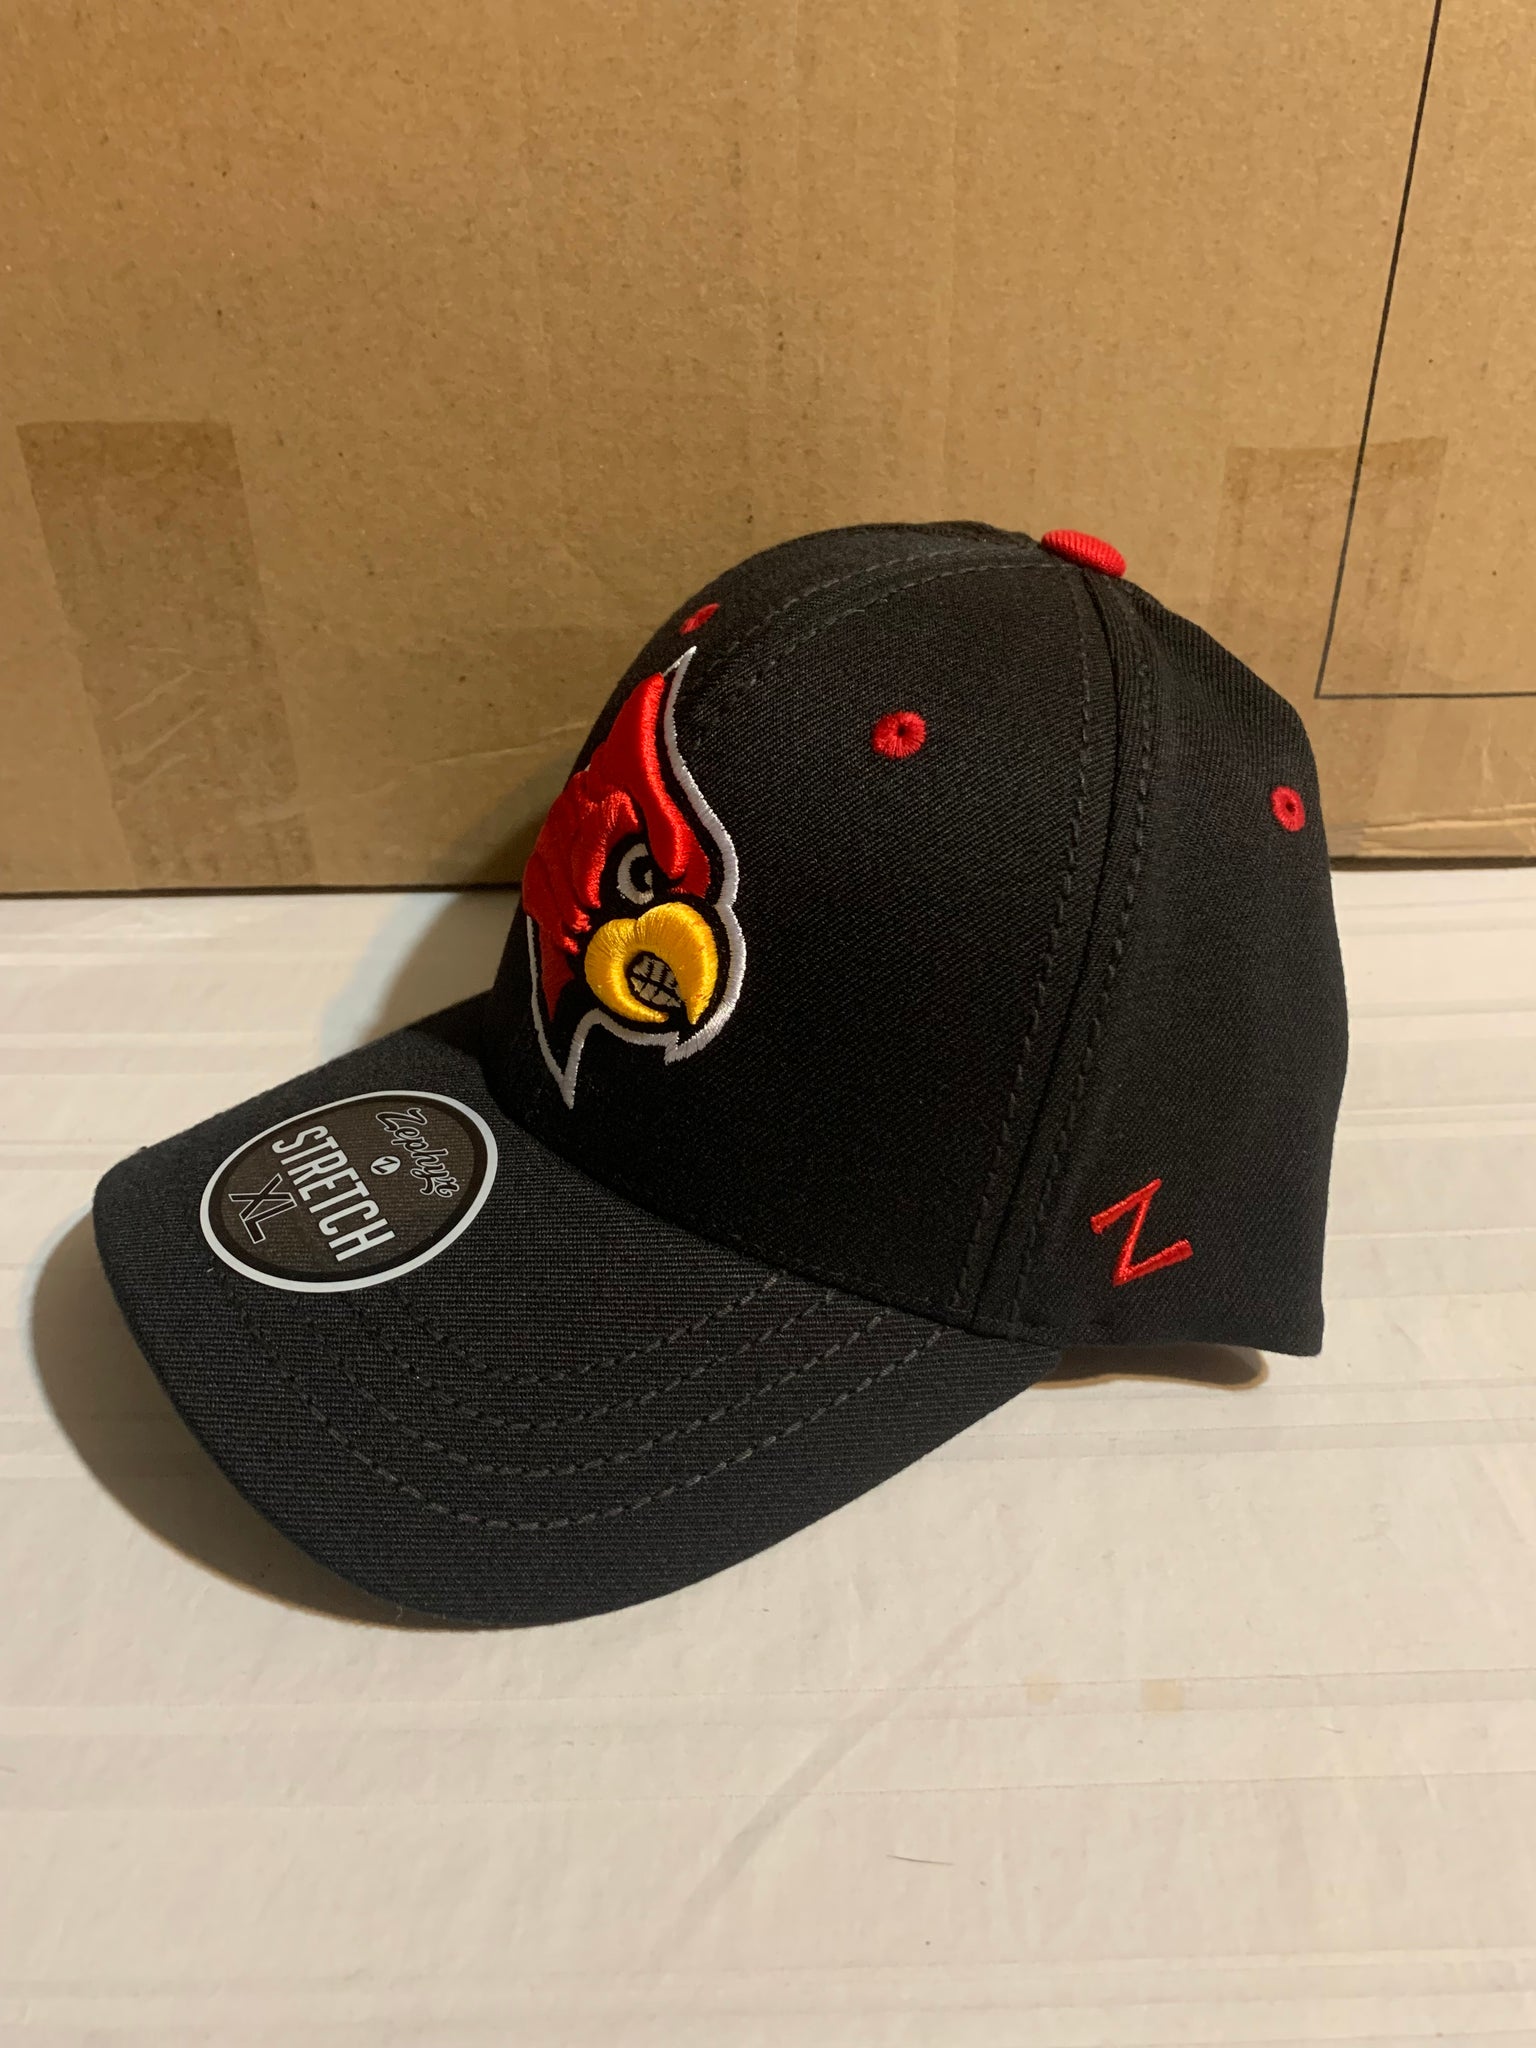 Official Zephyr Louisville Cardinals Fitted Hat College University